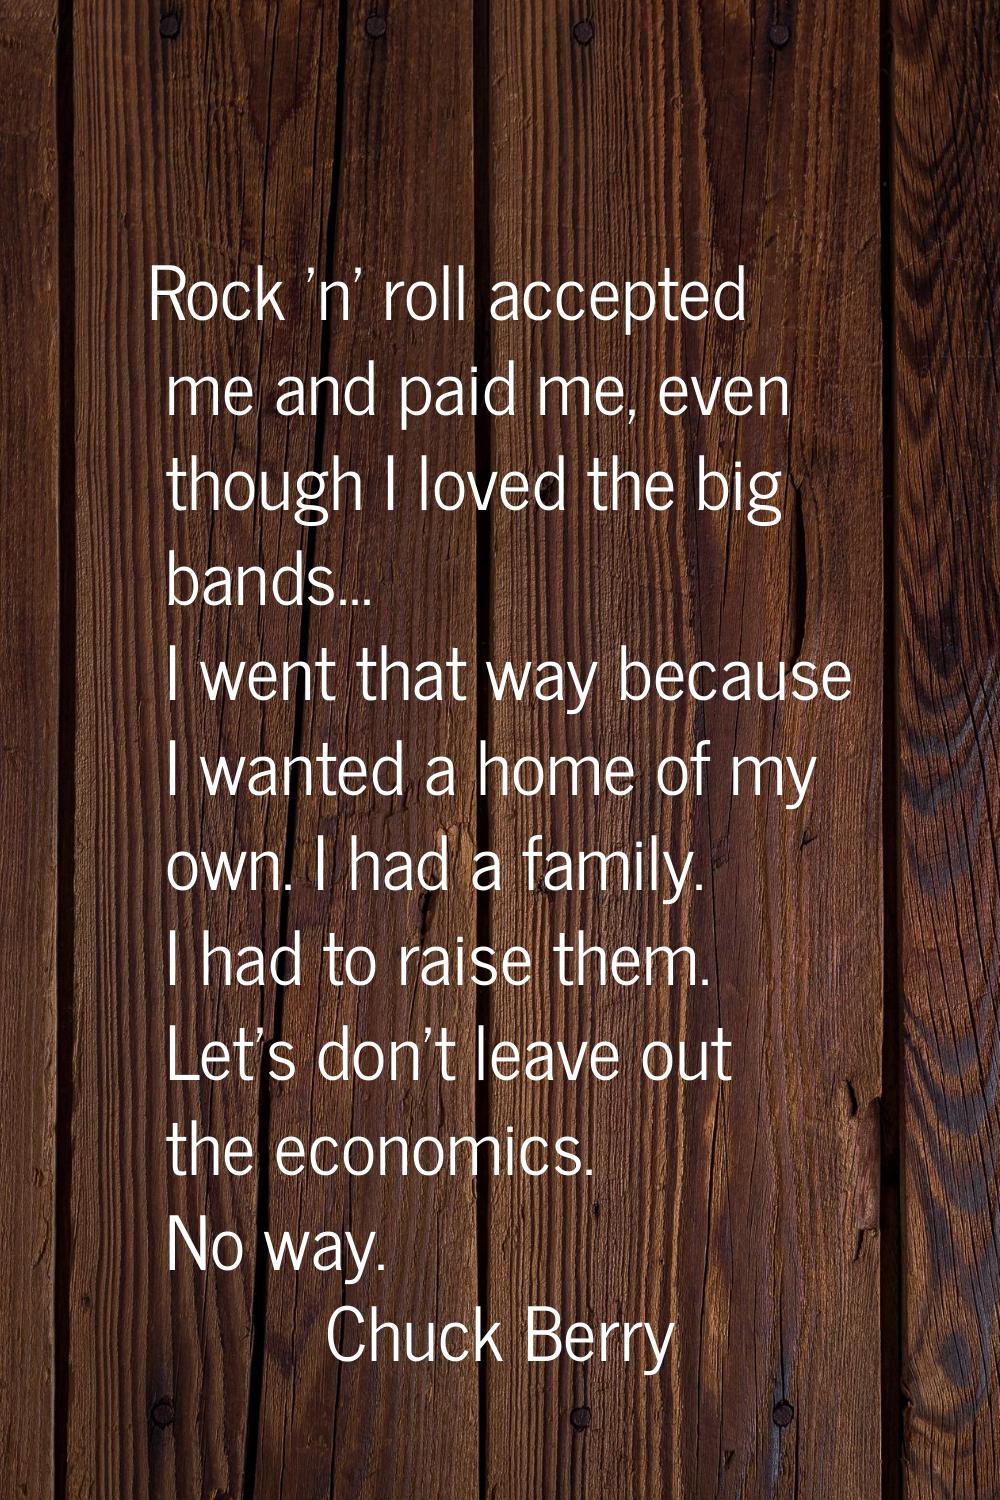 Rock 'n' roll accepted me and paid me, even though I loved the big bands... I went that way because